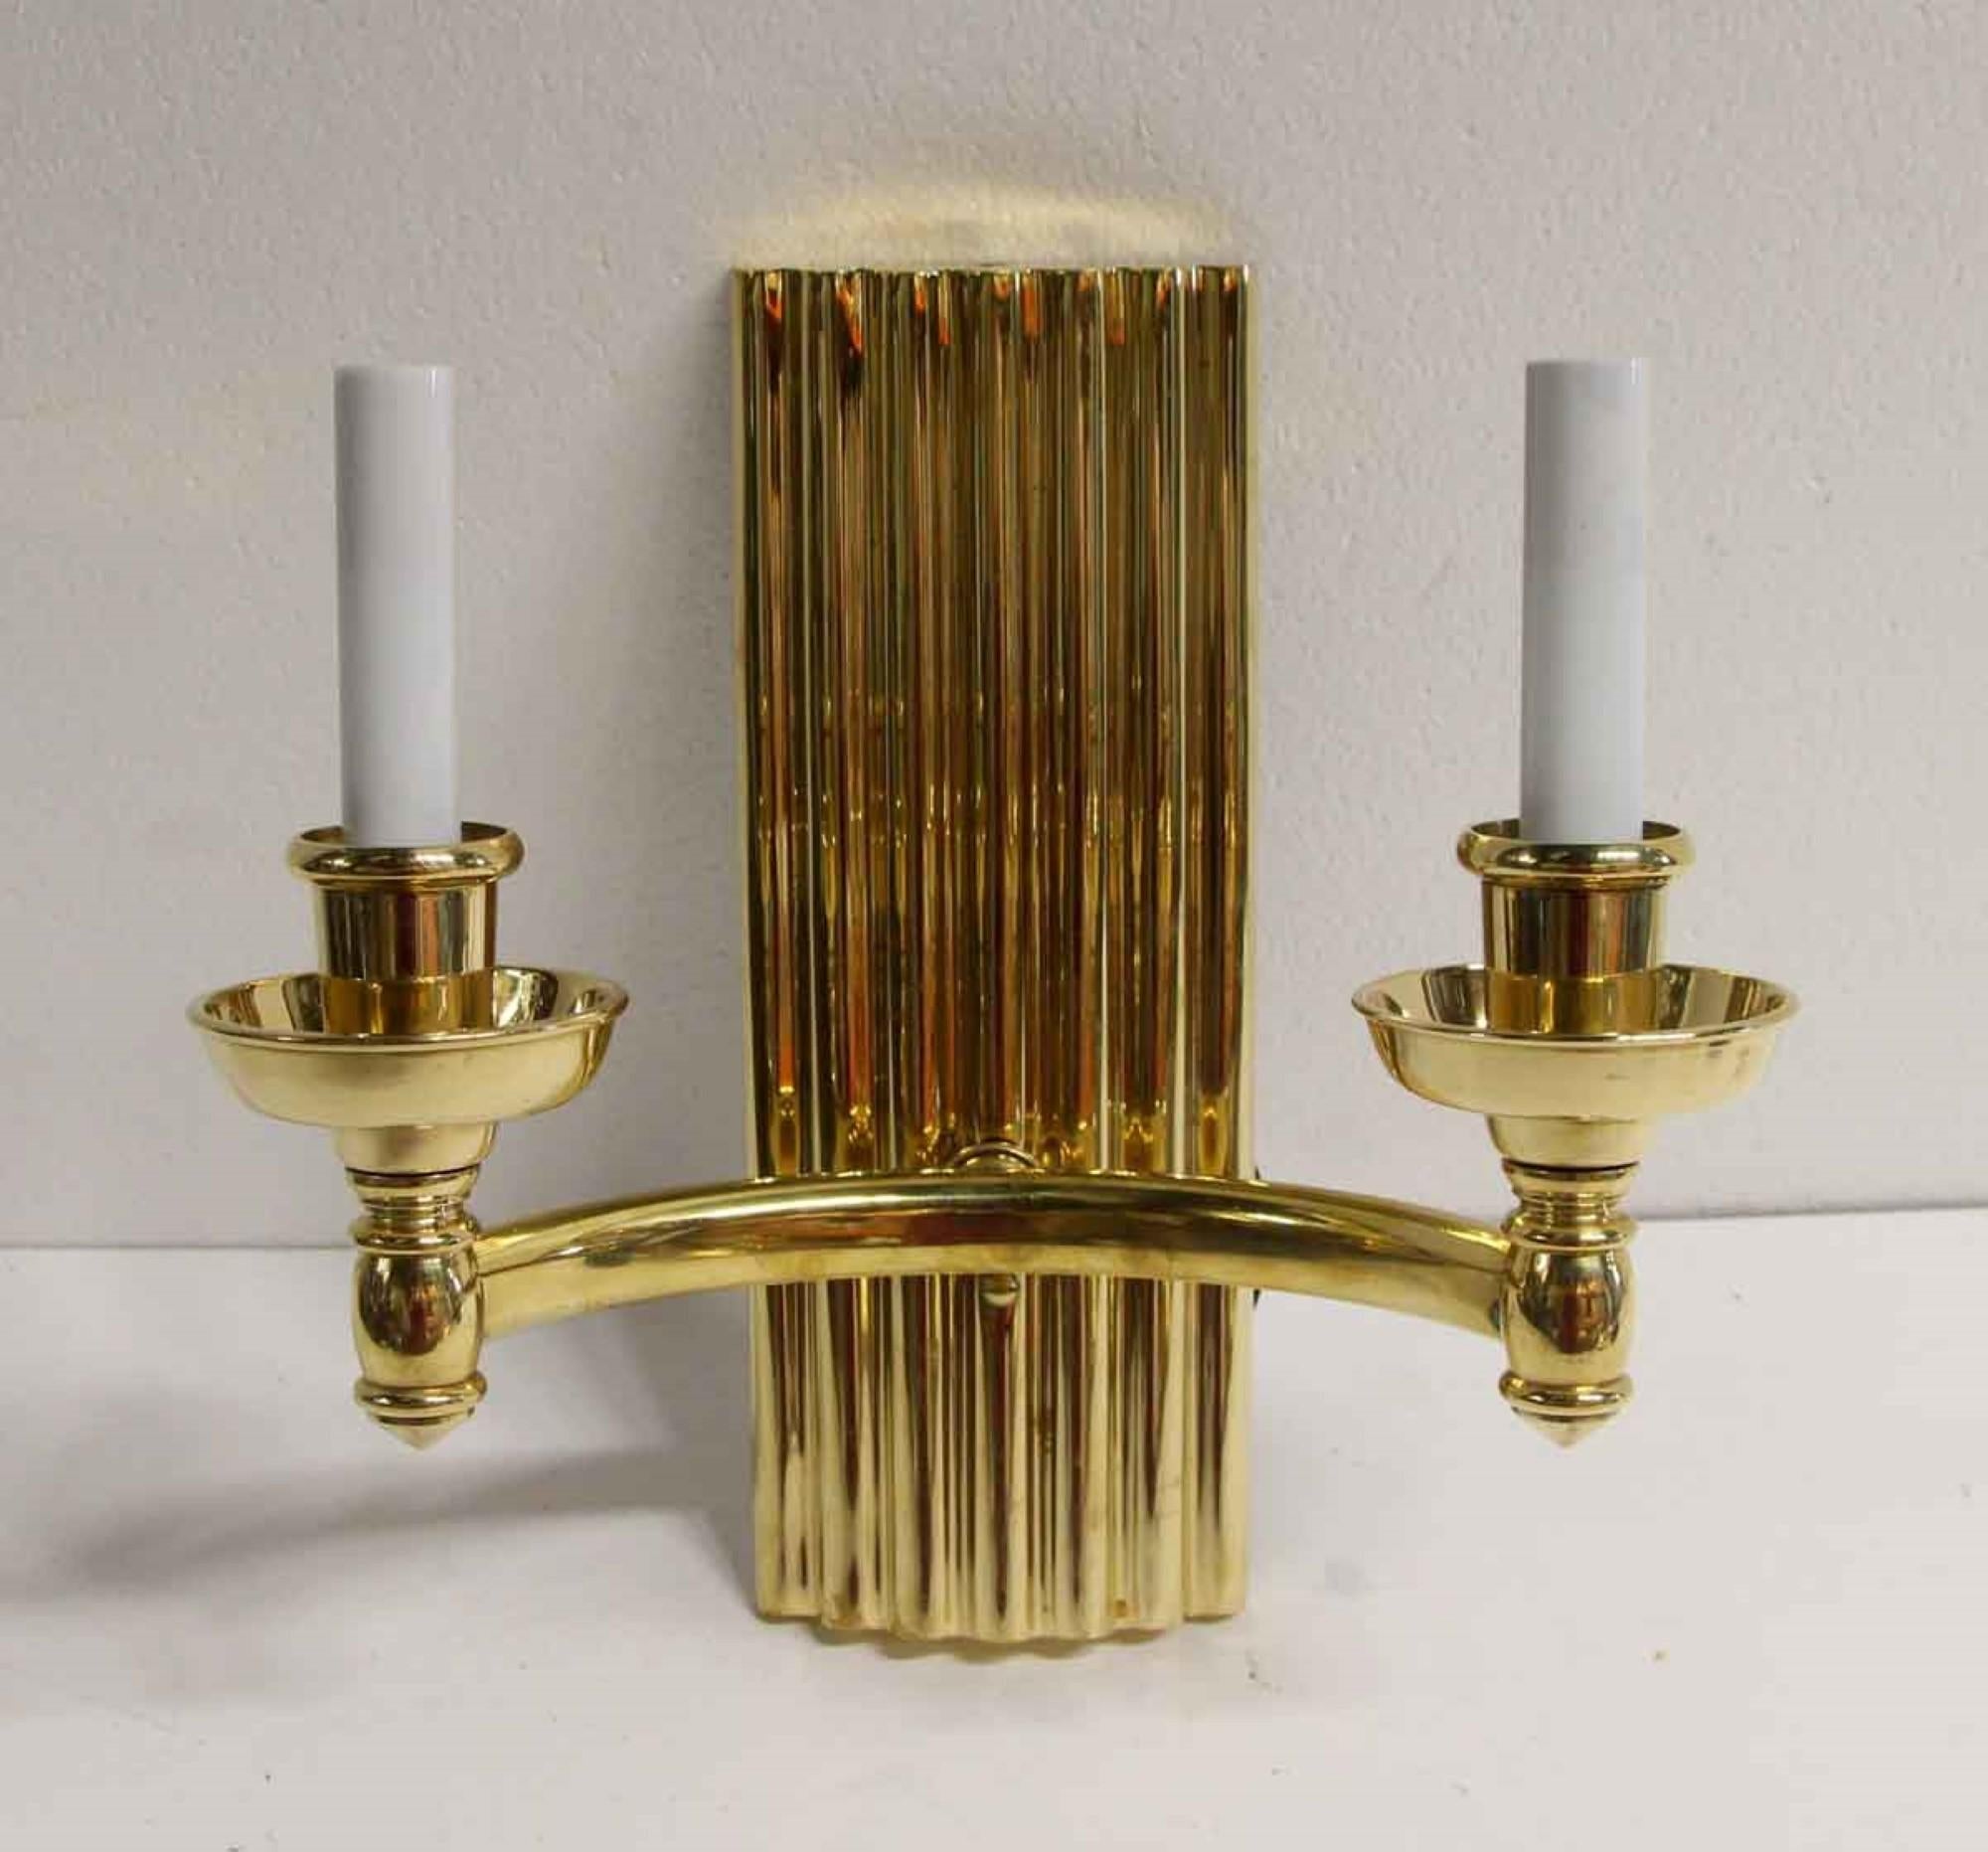 Polished 2000s Art Deco Style Cast Brass Sconce with Ribbed Backplate with Double Arms